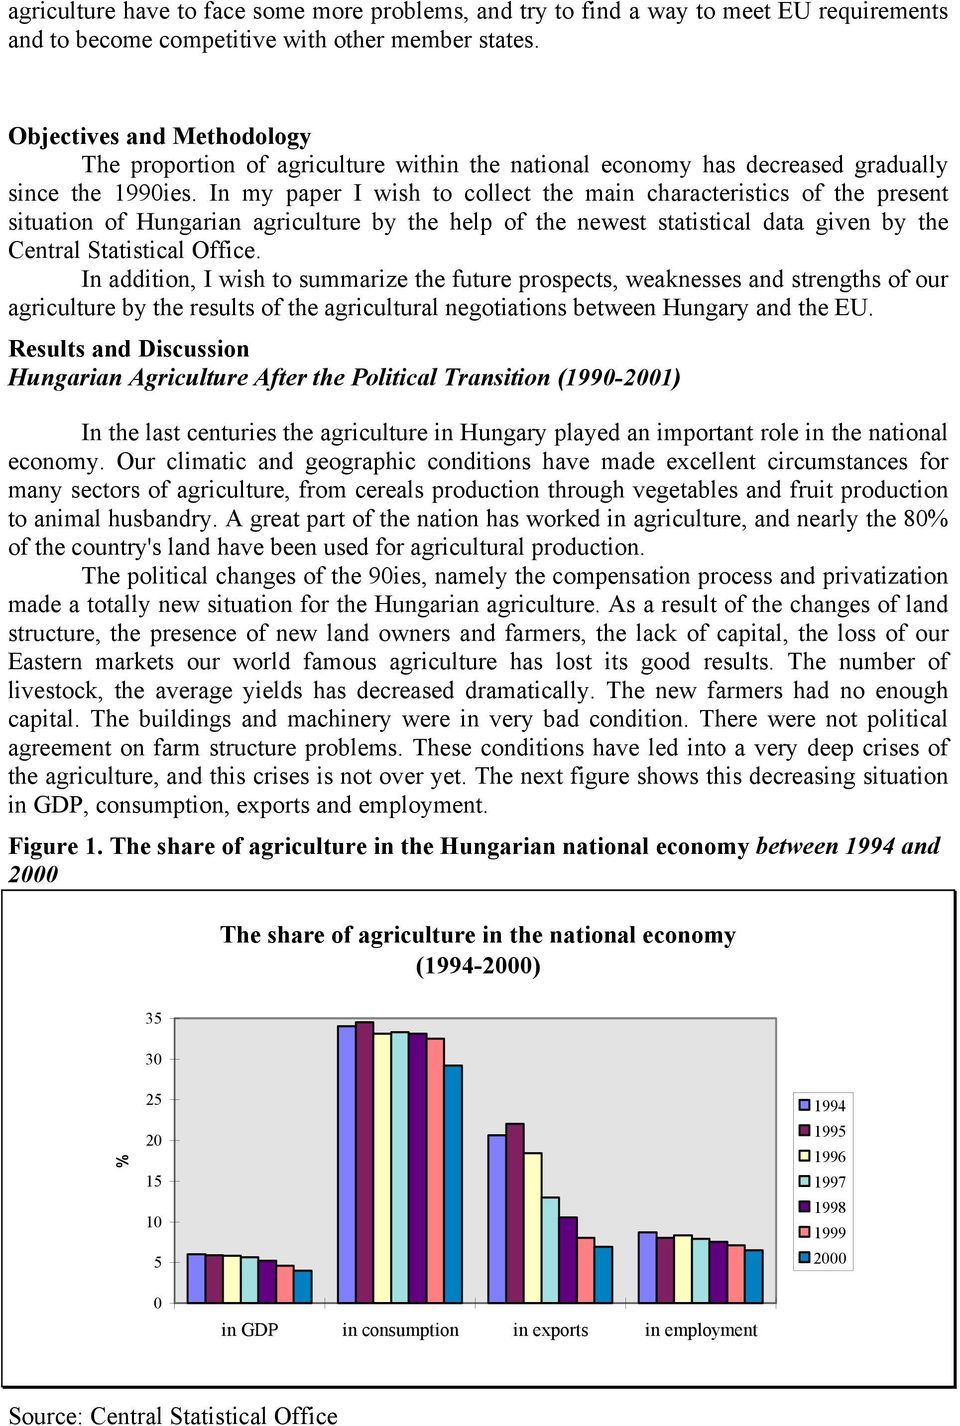 In my paper I wish to collect the main characteristics of the present situation of Hungarian agriculture by the help of the newest statistical data given by the Central Statistical Office.